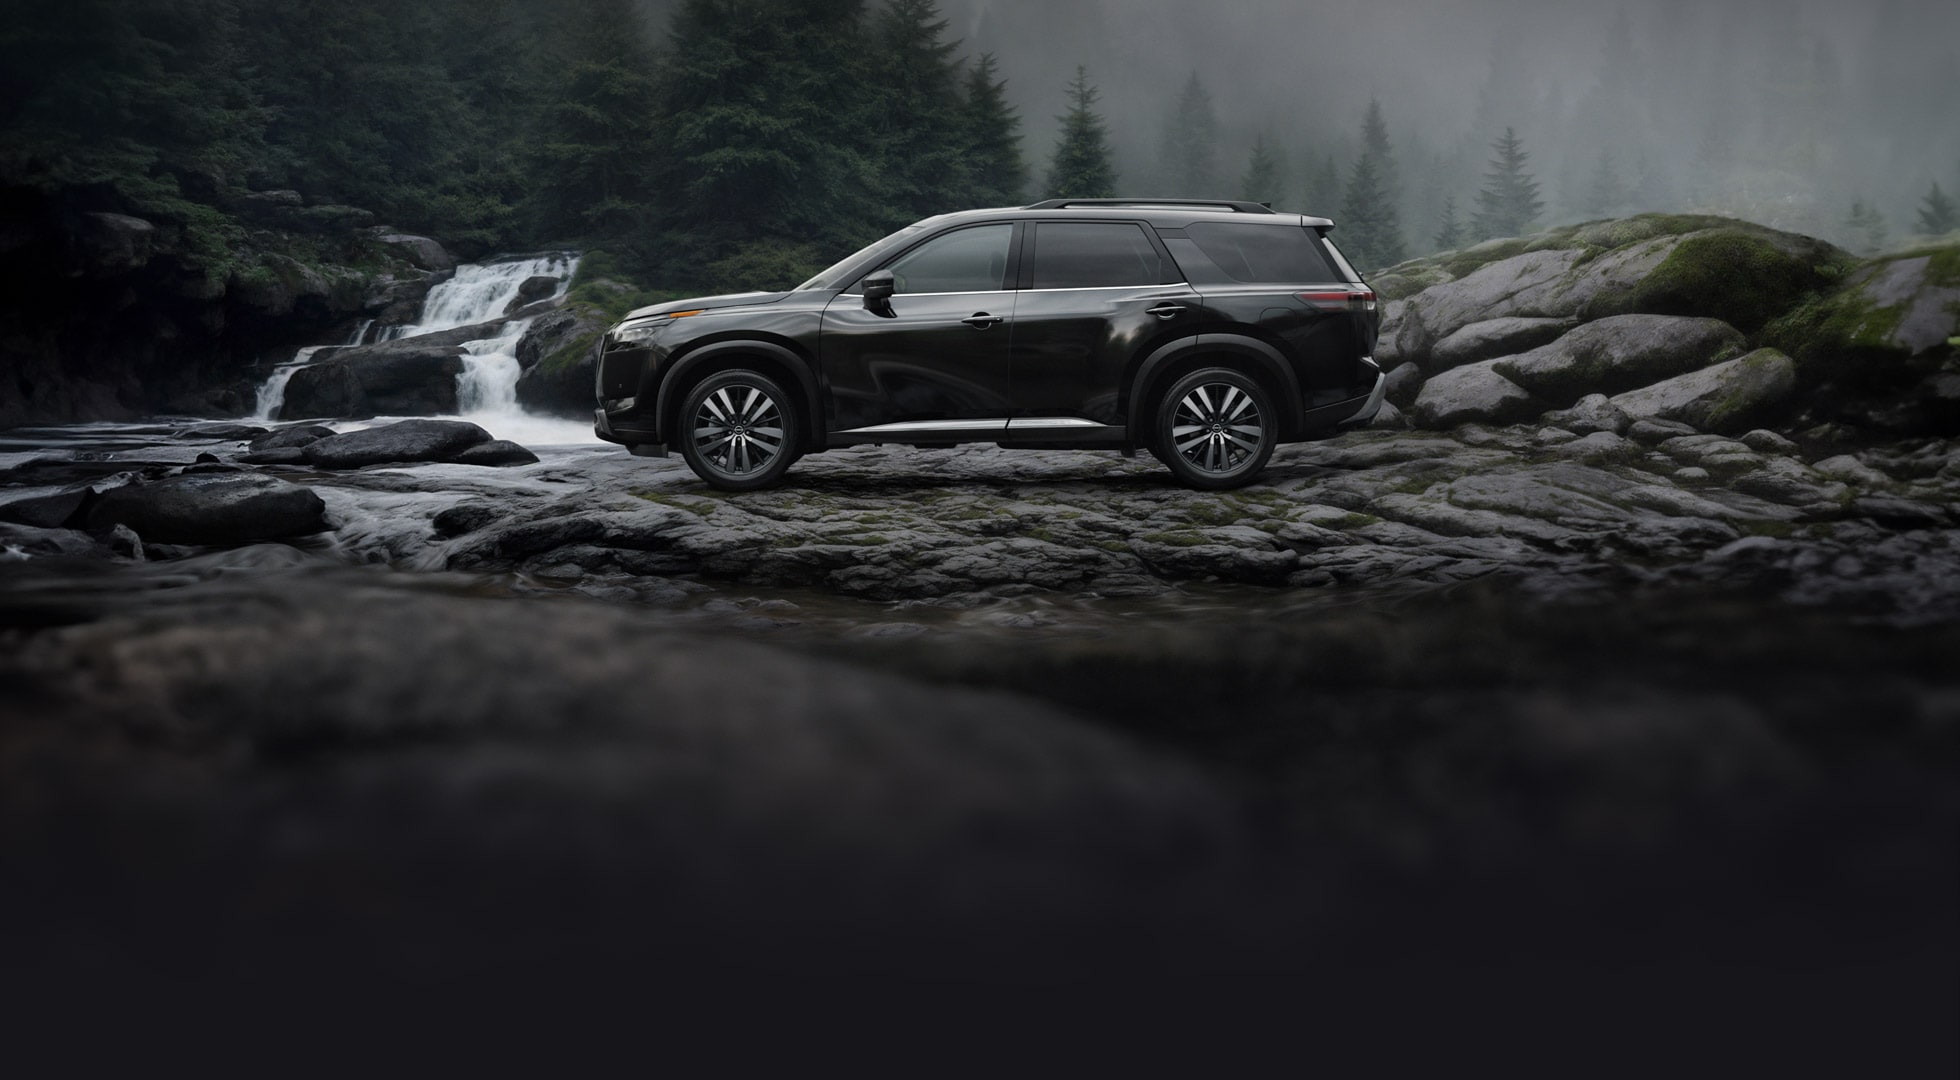 side view of Nissan Pathfinder on a rocky terrain